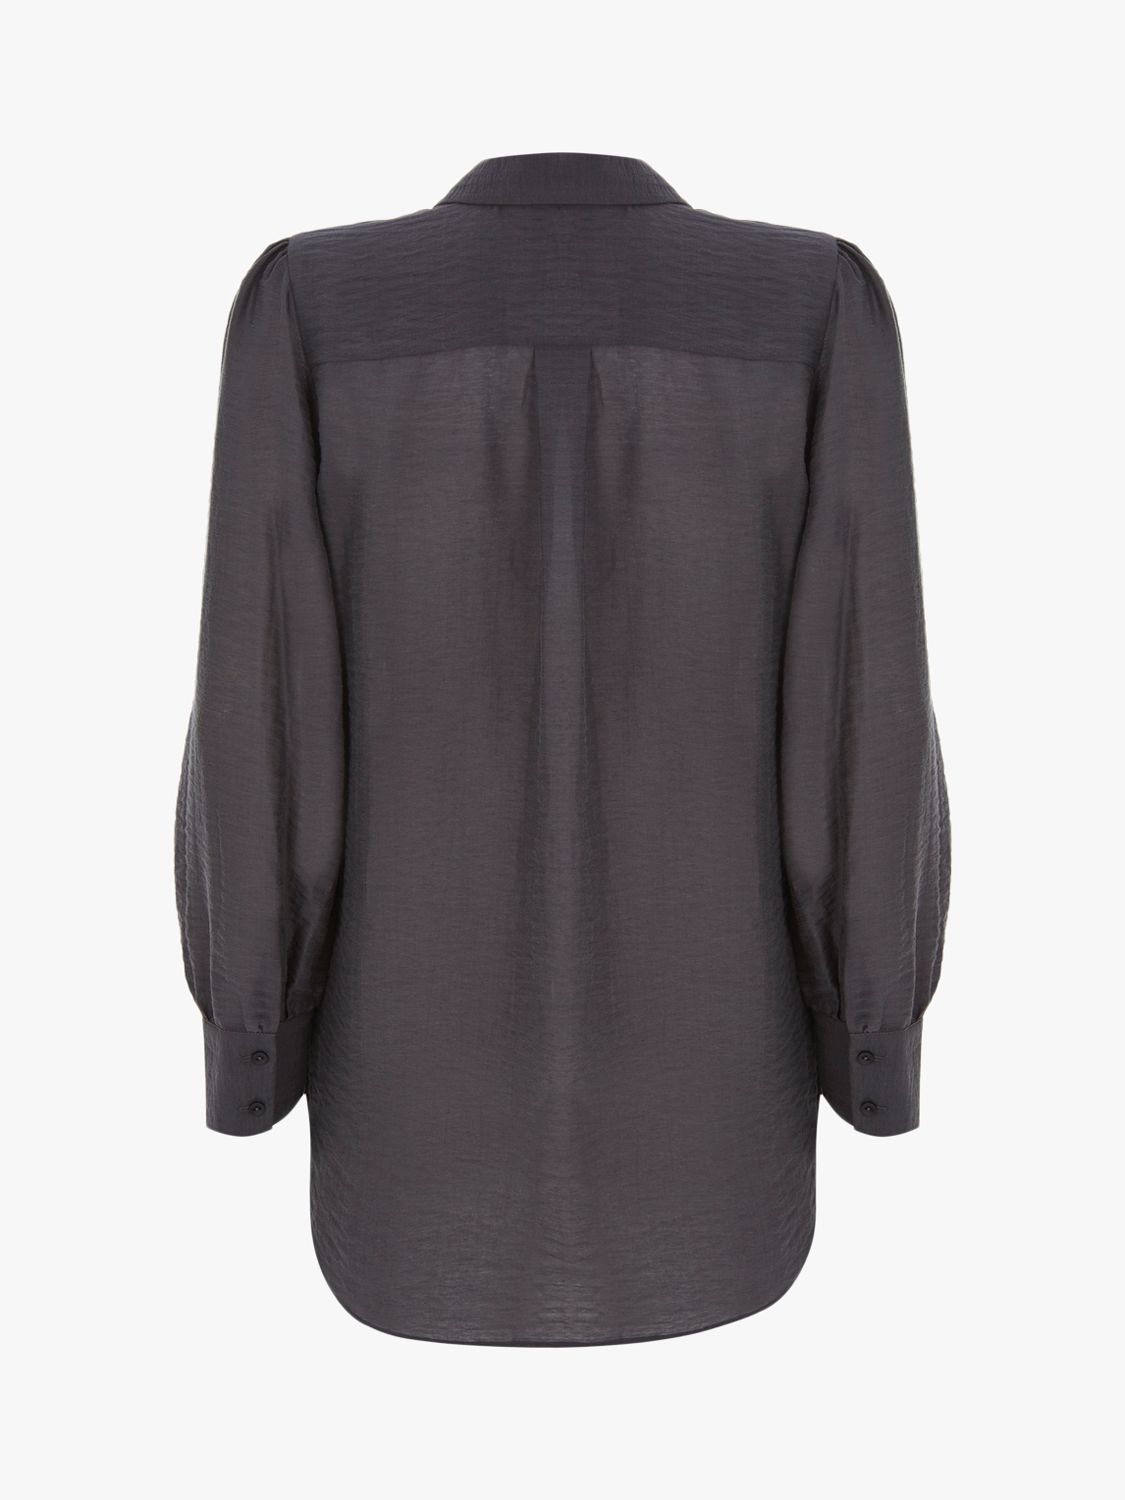 Mint Velvet Knotted Relaxed Fit Shirt, Dark Grey at John Lewis & Partners